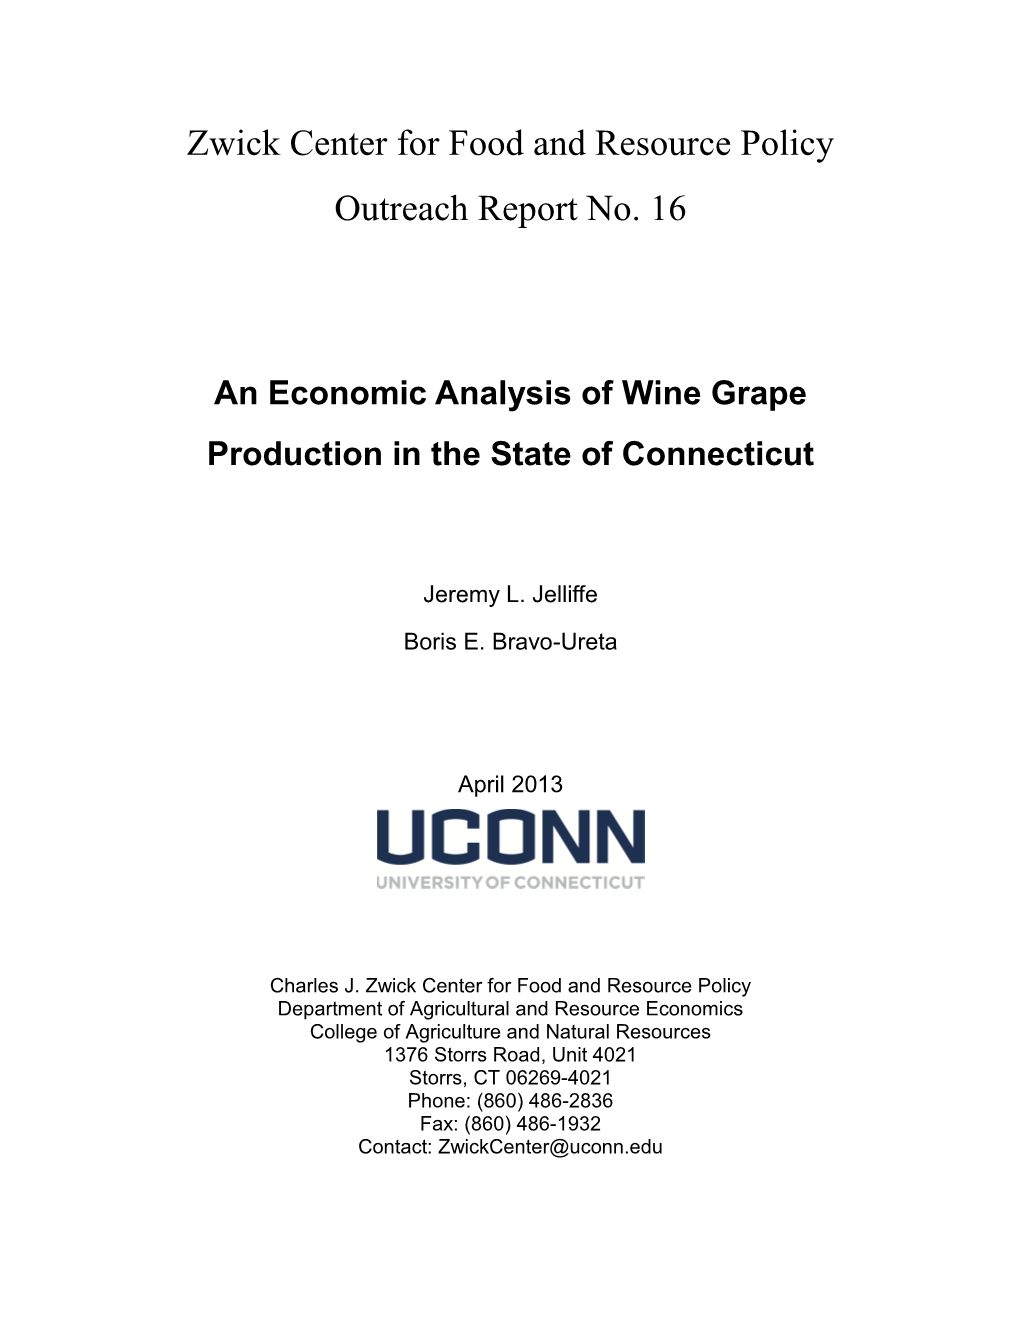 An Economic Analysis of Wine Grape Production in the State of Connecticut